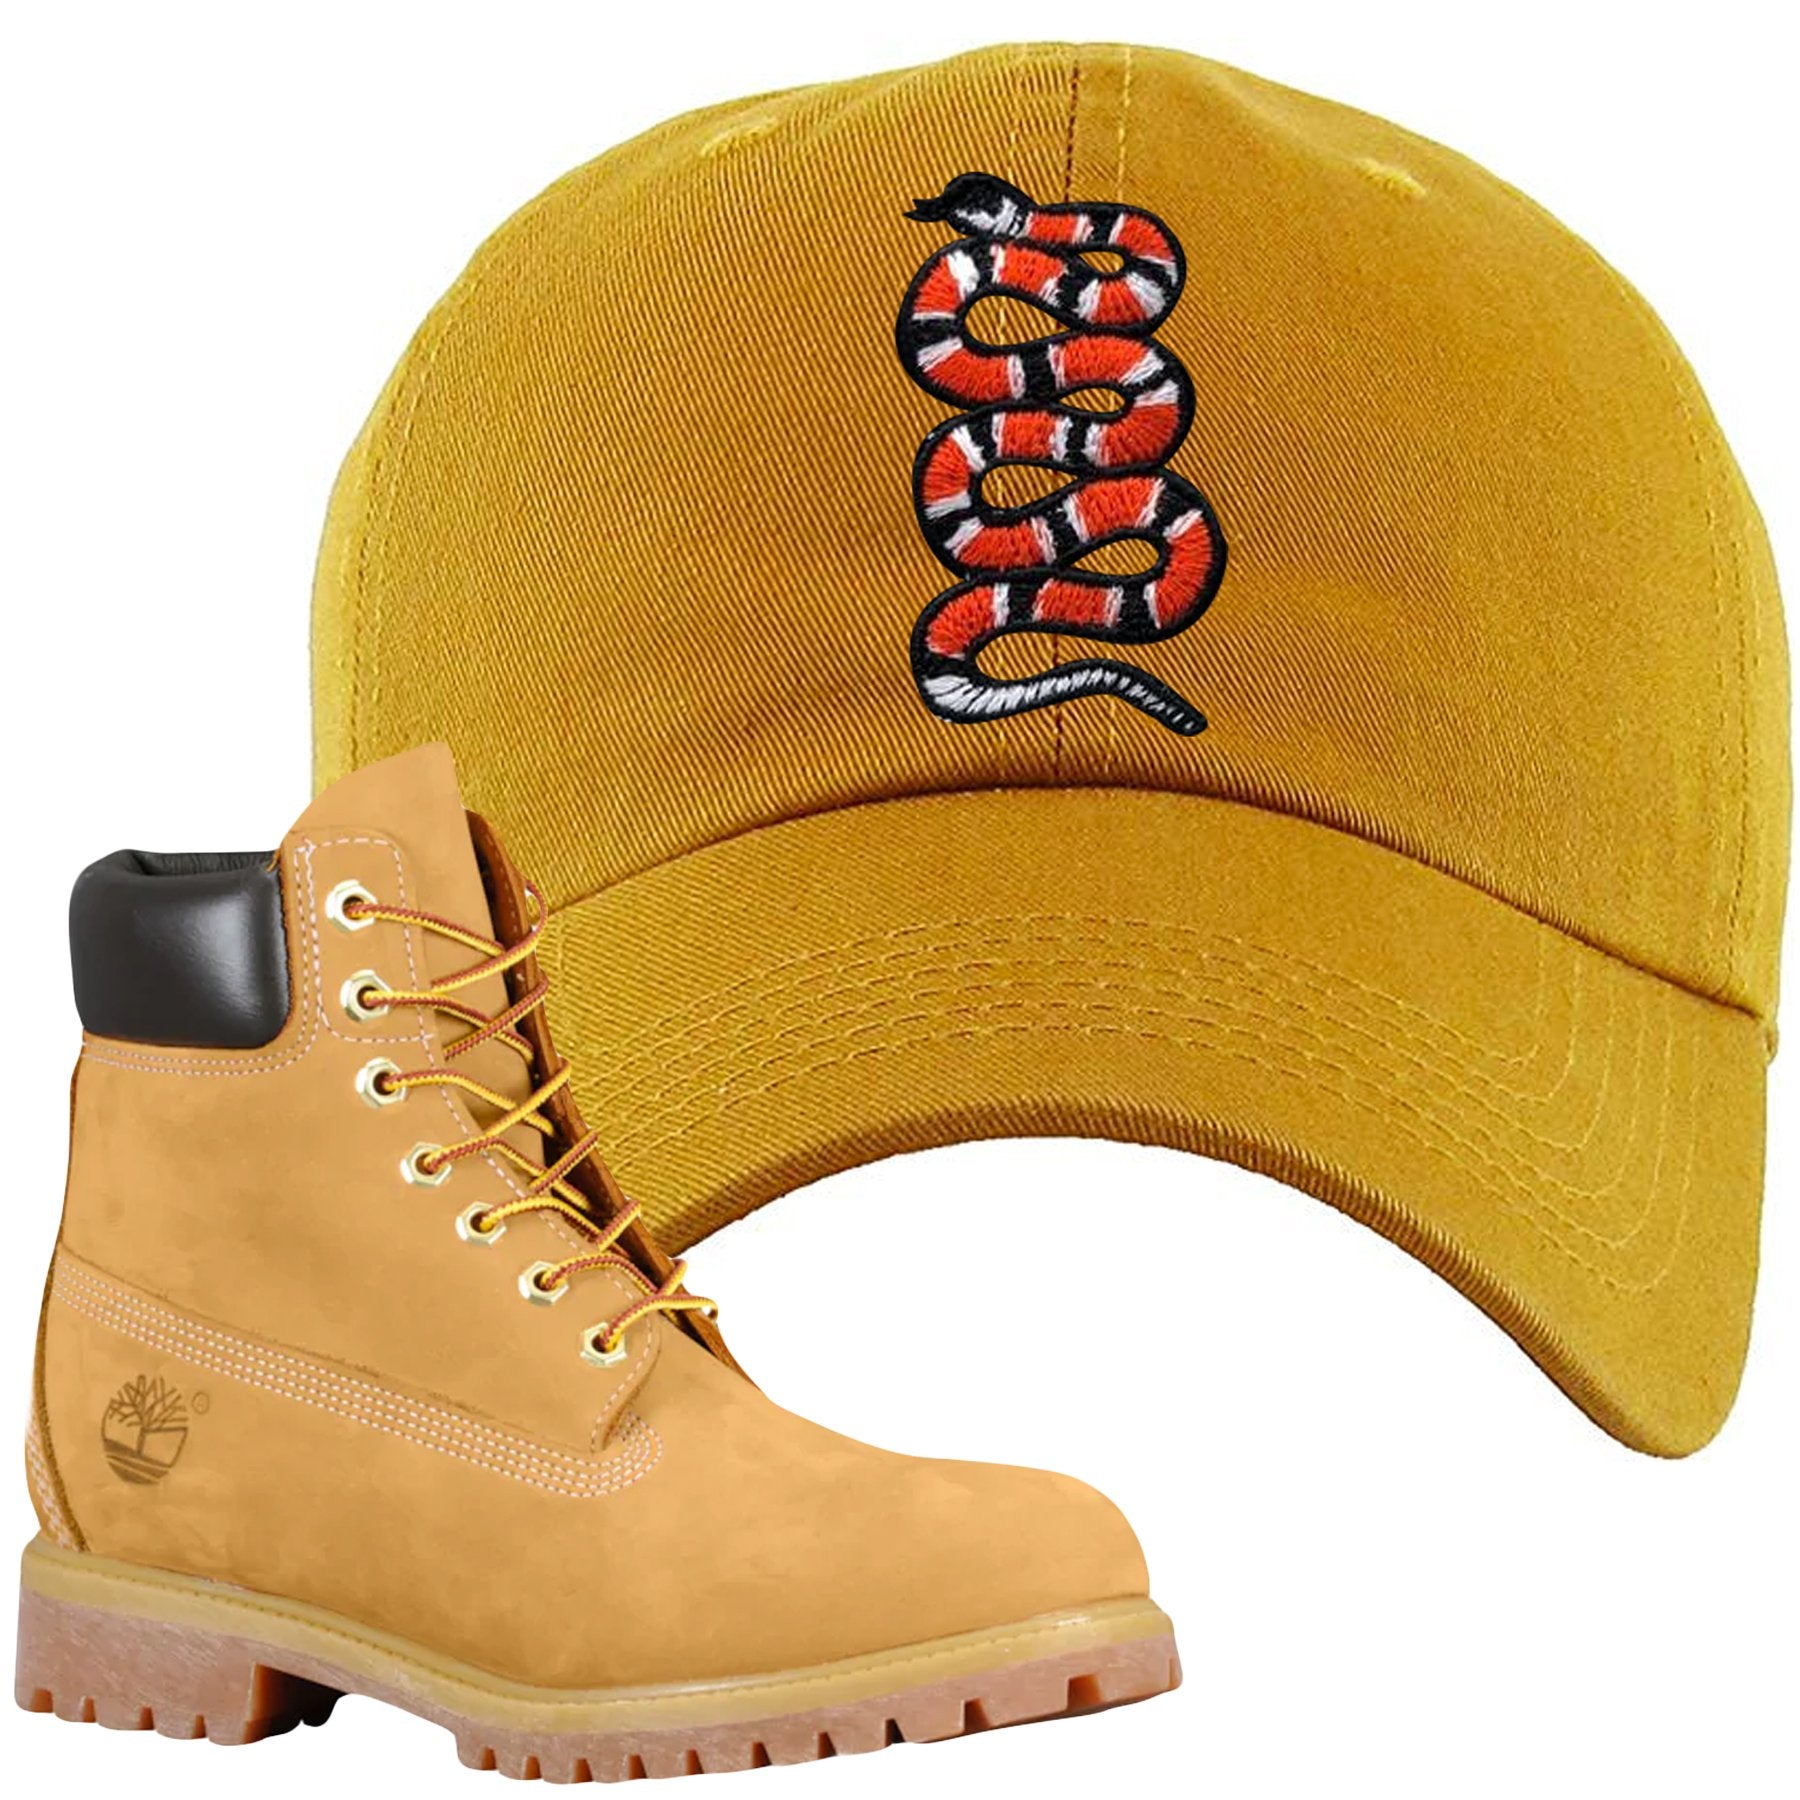 Embroidered on the front of the Wheat Timbs matching timberland boot dad hat is the matching timbs logo